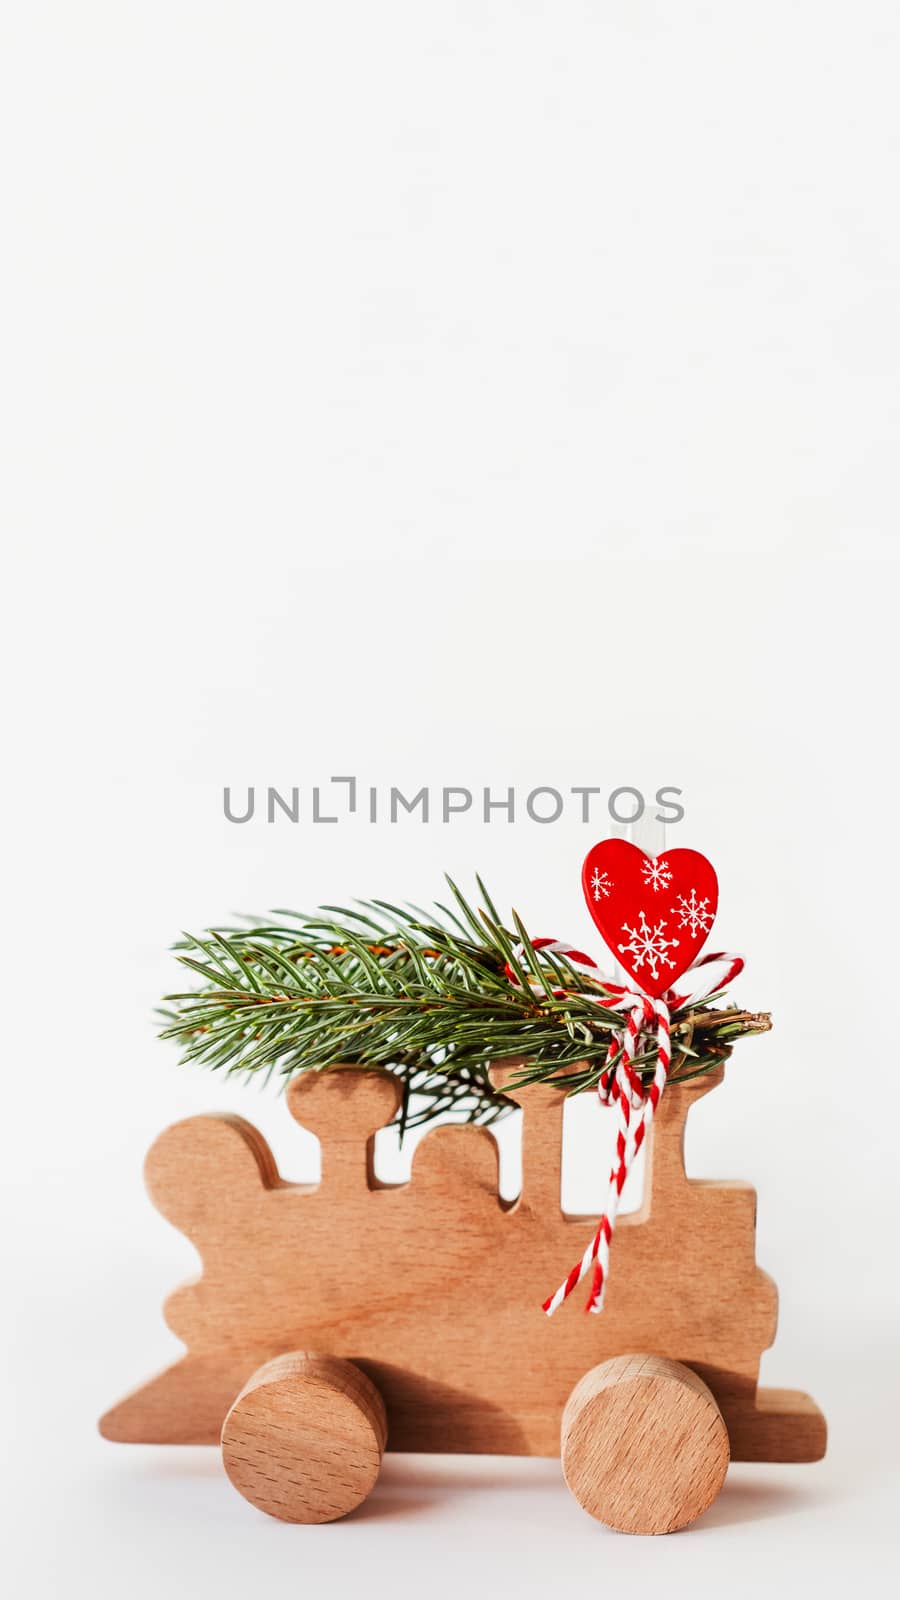 Wooden train with tied fir tree branches and red heart decoratio by aksenovko